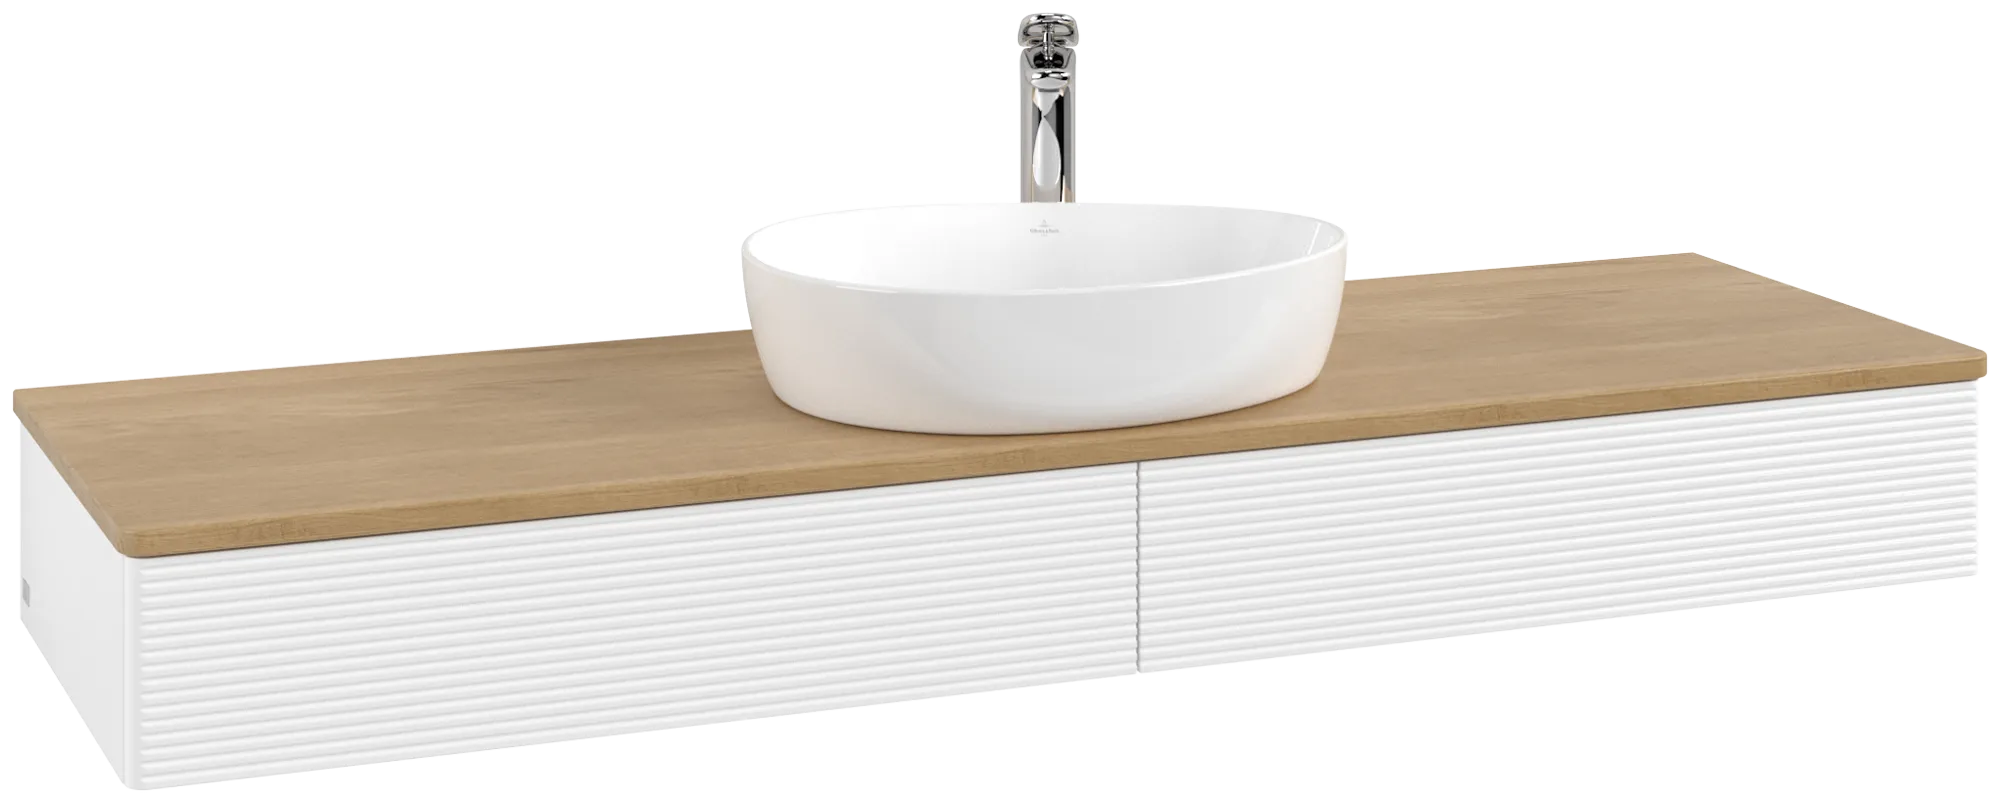 Picture of VILLEROY BOCH Antao Vanity unit, 2 pull-out compartments, 1600 x 190 x 500 mm, Front with grain texture, White Matt Lacquer / Honey Oak #K14151MT